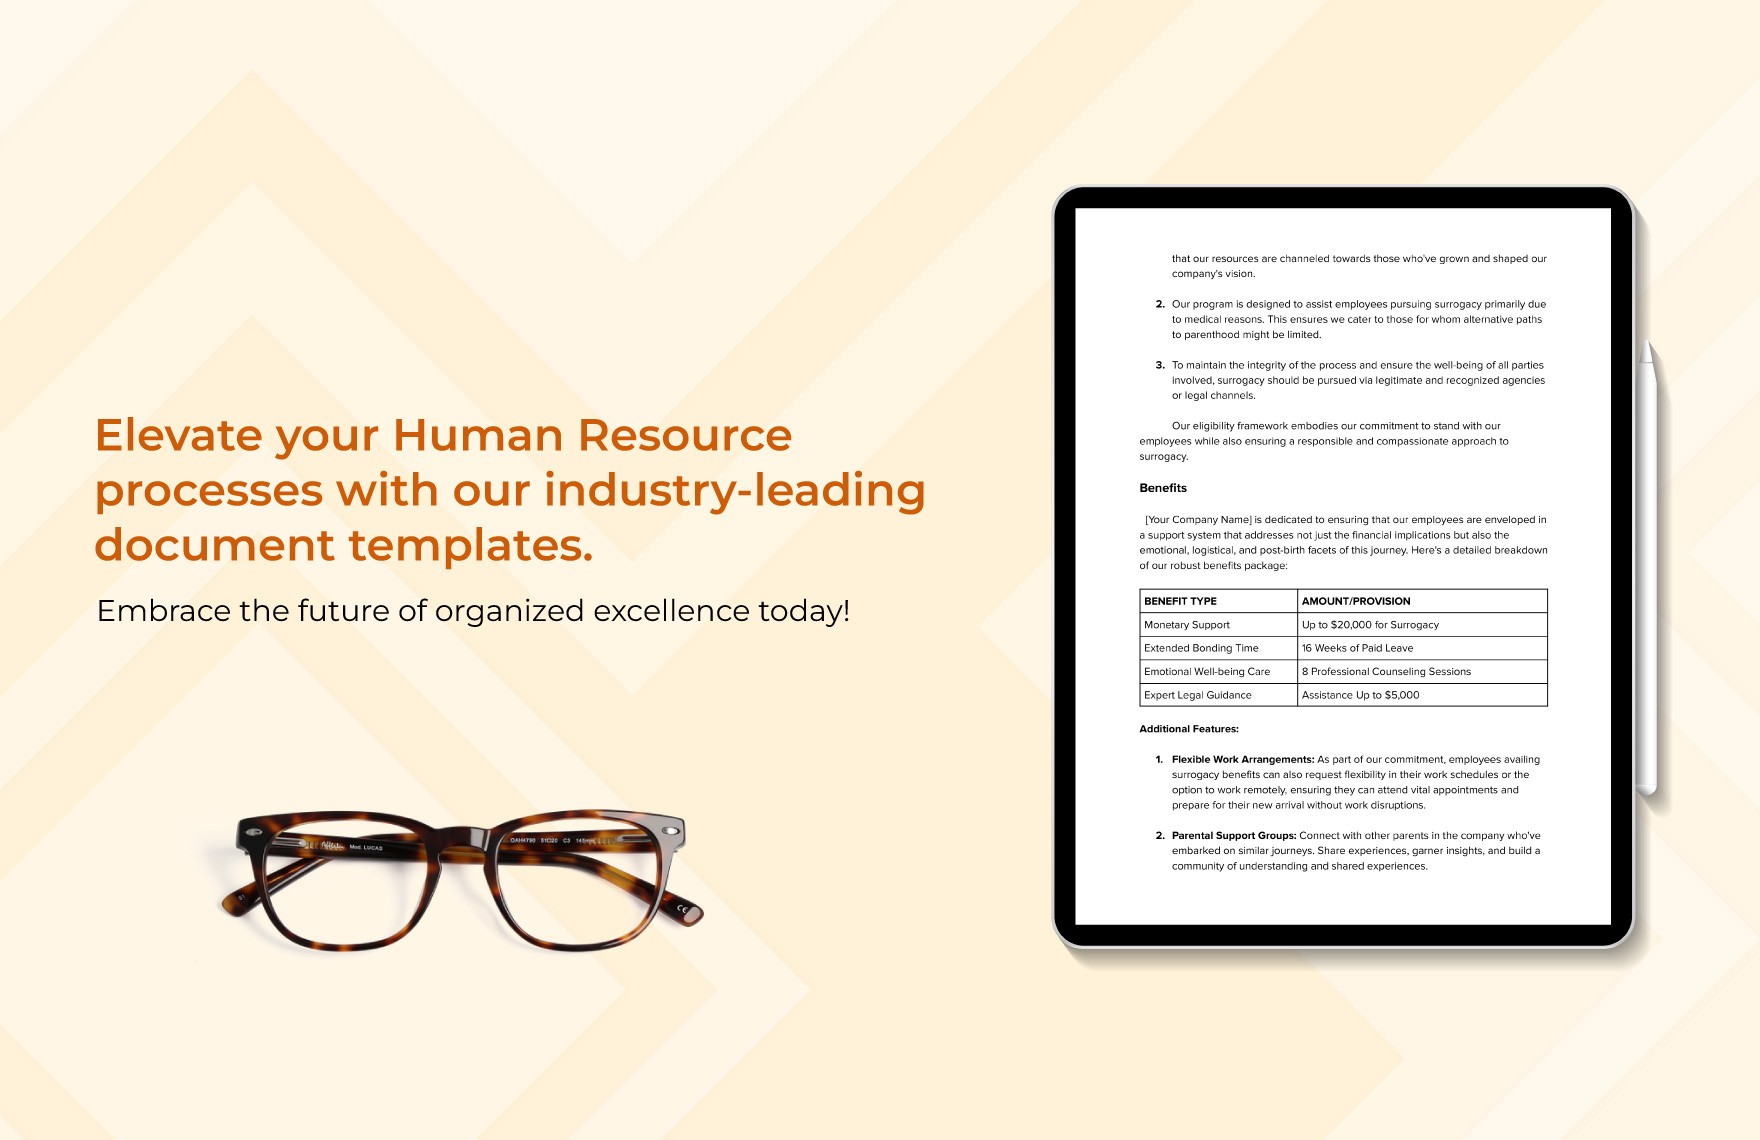 Adoption and Surrogacy Assistance Manual HR Template